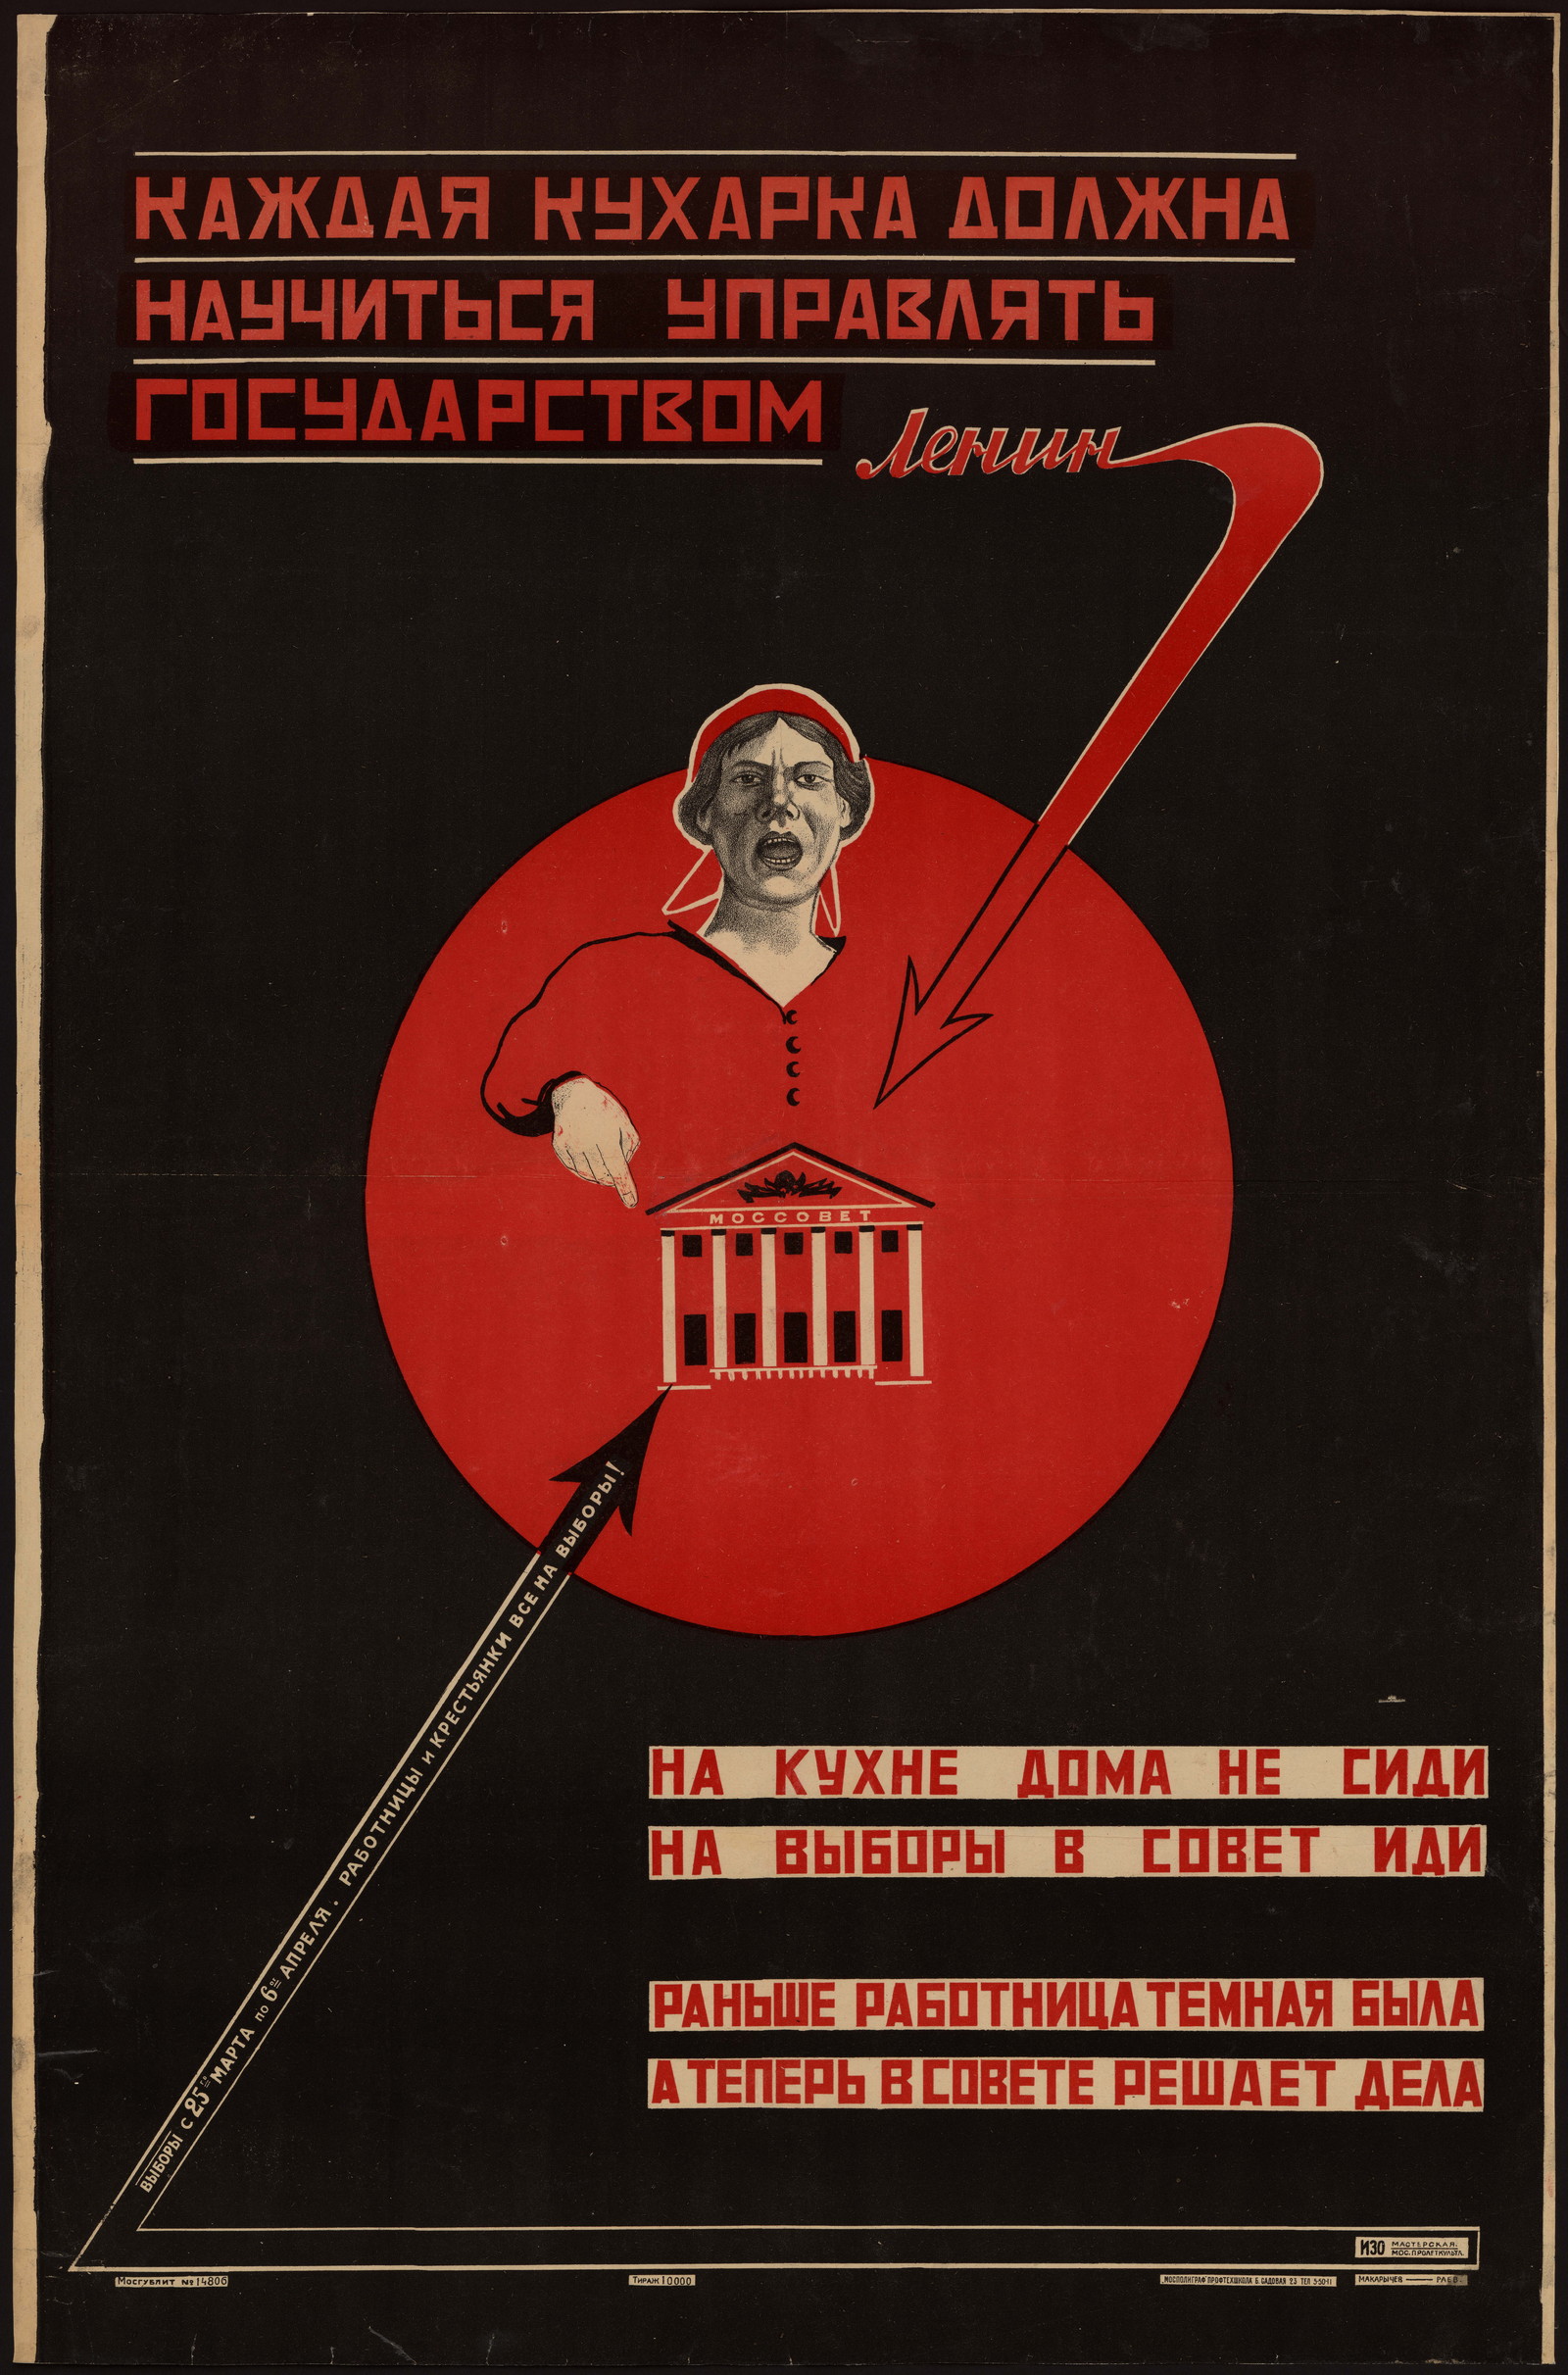 Every cook must learn to govern the state..., USSR, 1925. - Poster, the USSR, Lenin, State, Female, Power, Propaganda, Politics, Women